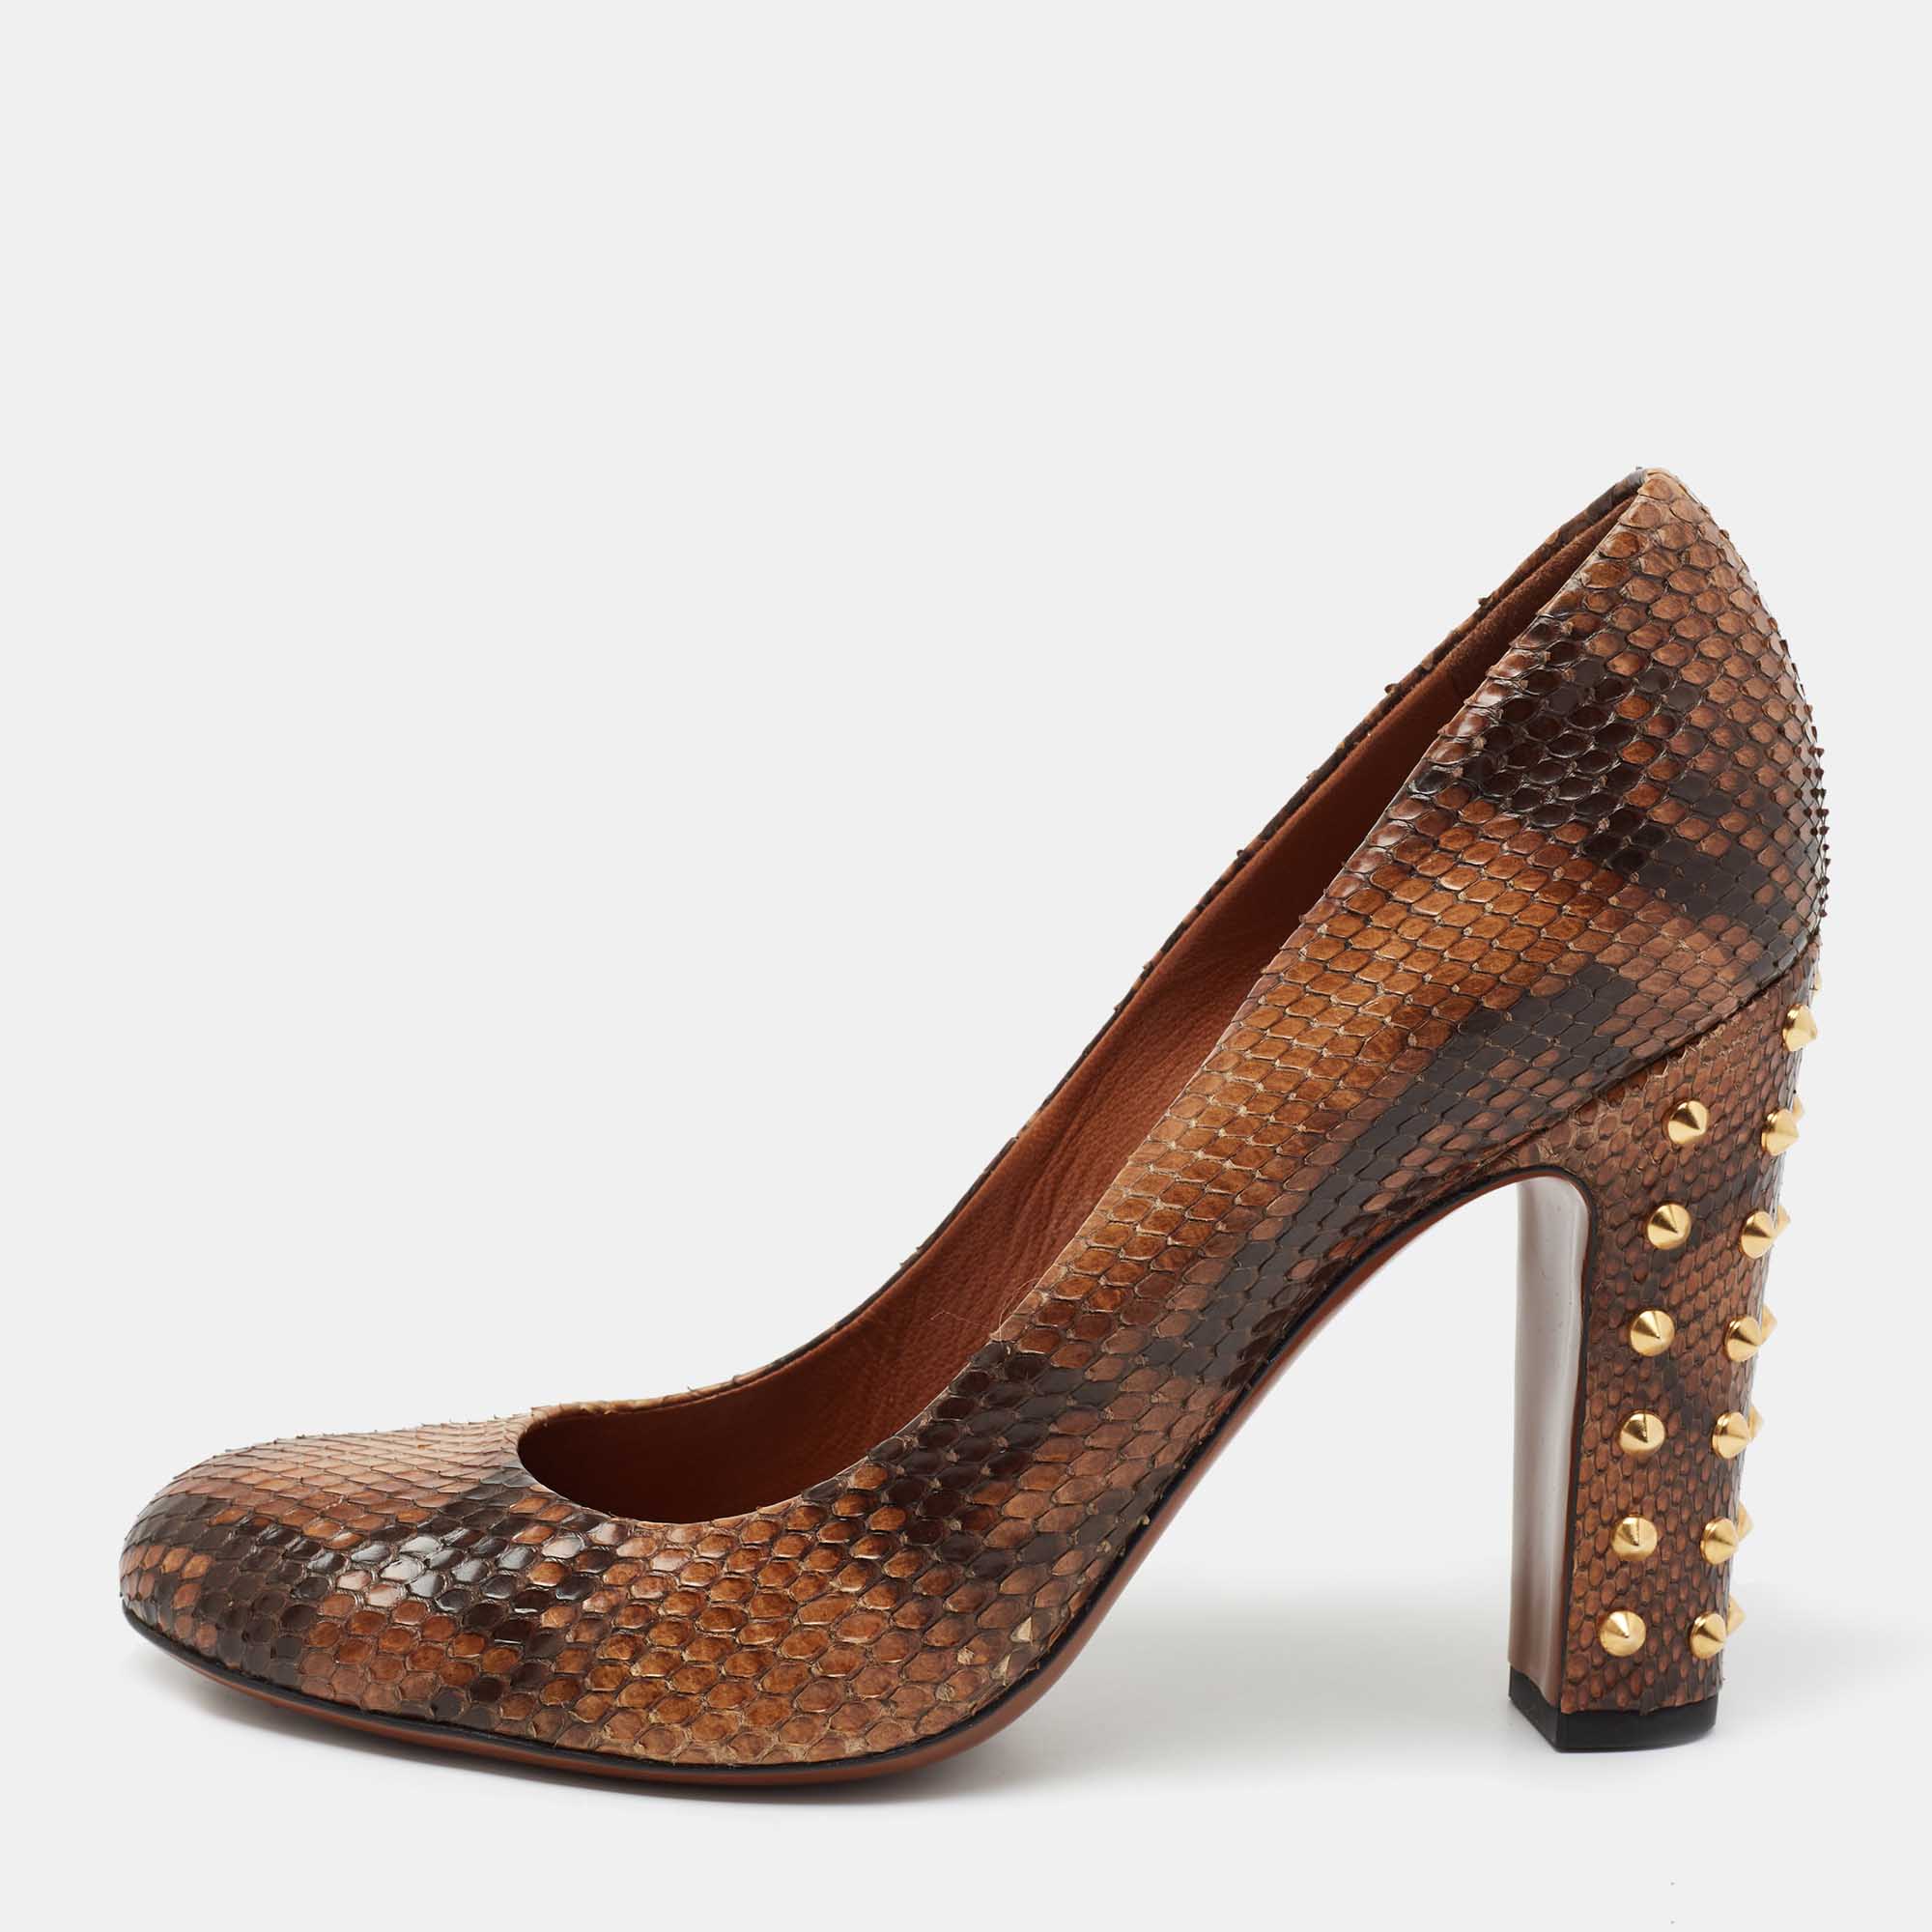 Gucci brown/black python leather studded heel pumps size 40